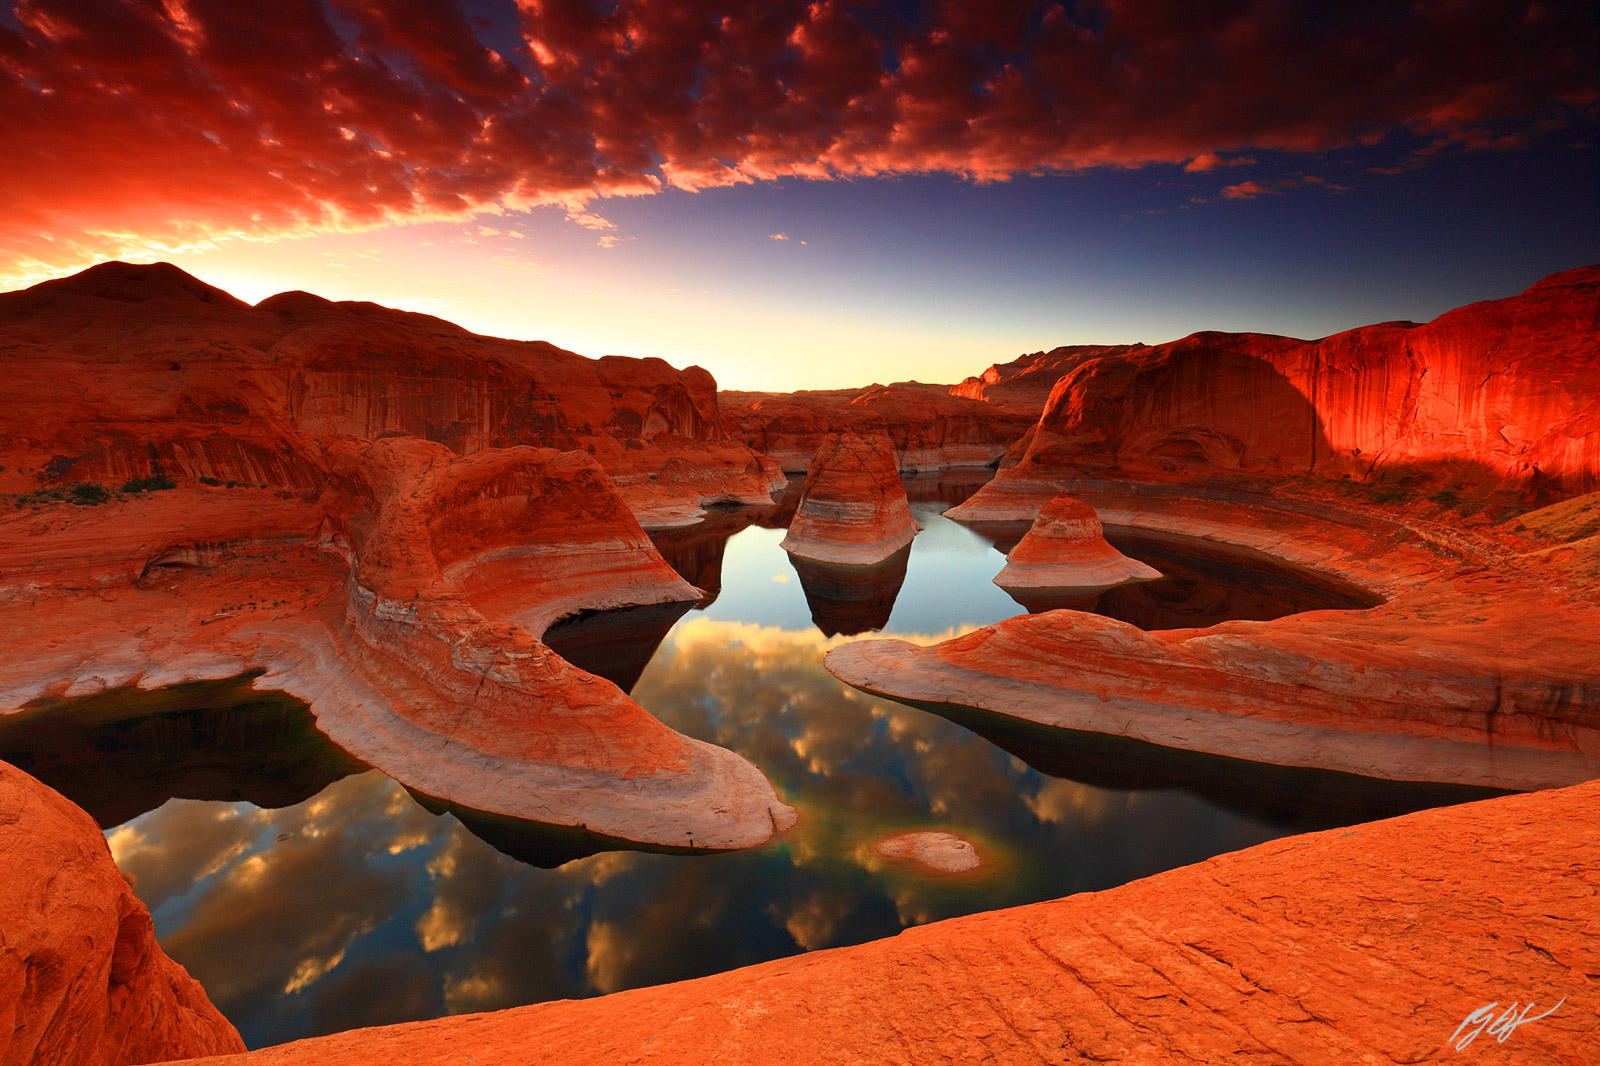 Sunrise over Reflection Canyon on Lake Powell in the Glen Canyon National Recreation Area in Utah